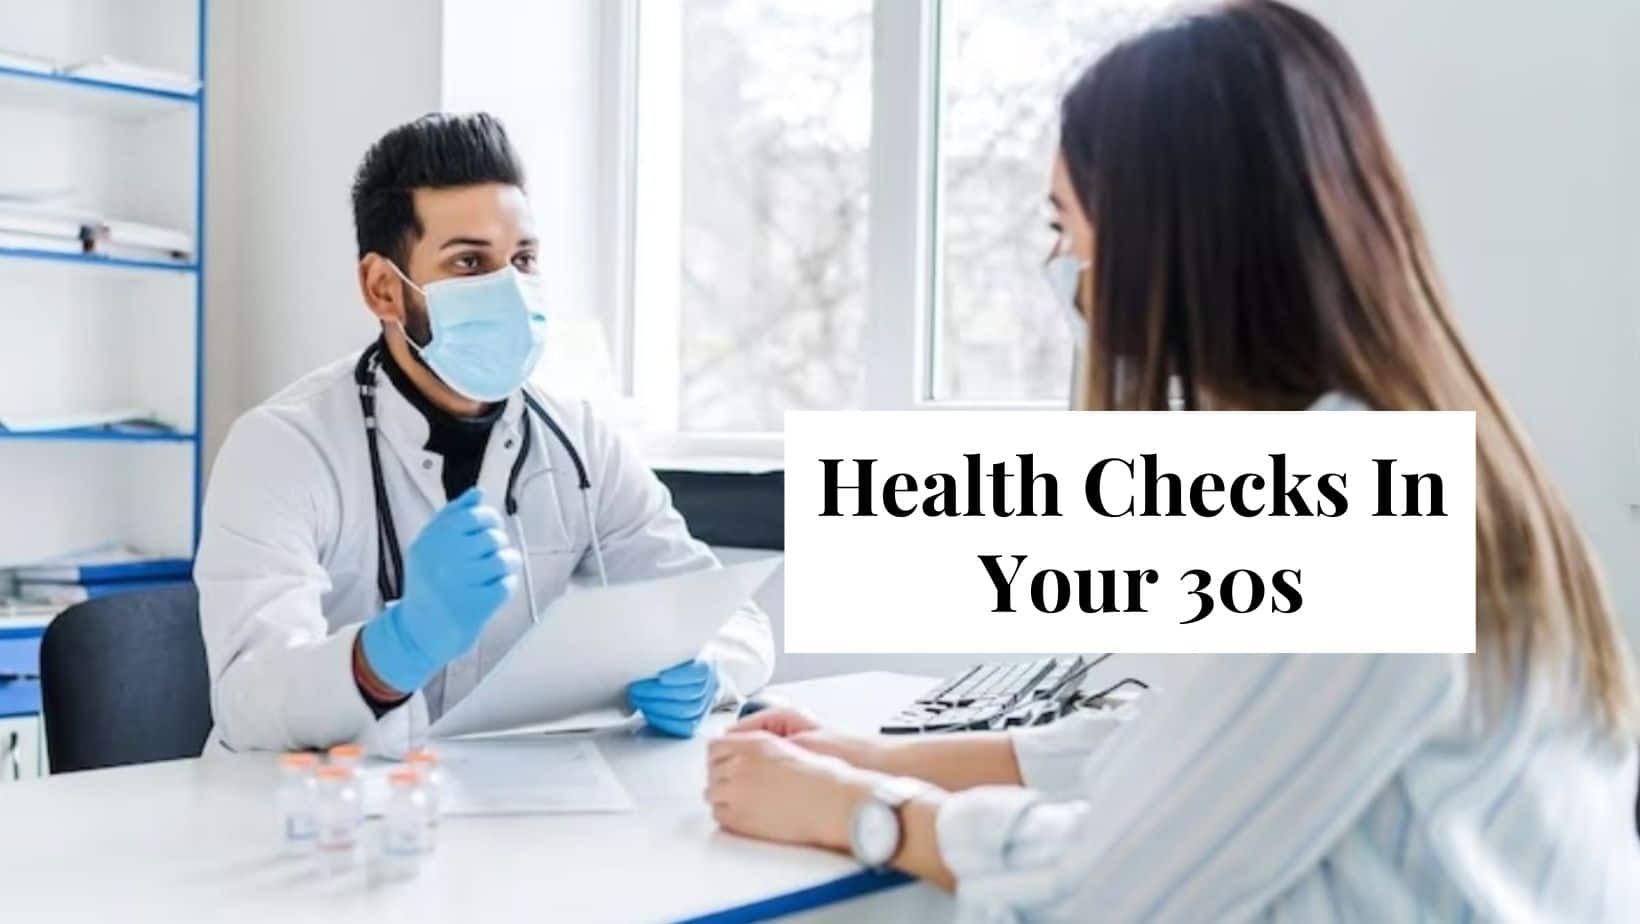 Breast To Cholesterol Screening: Health Checks Women Must Do In Their 30’s